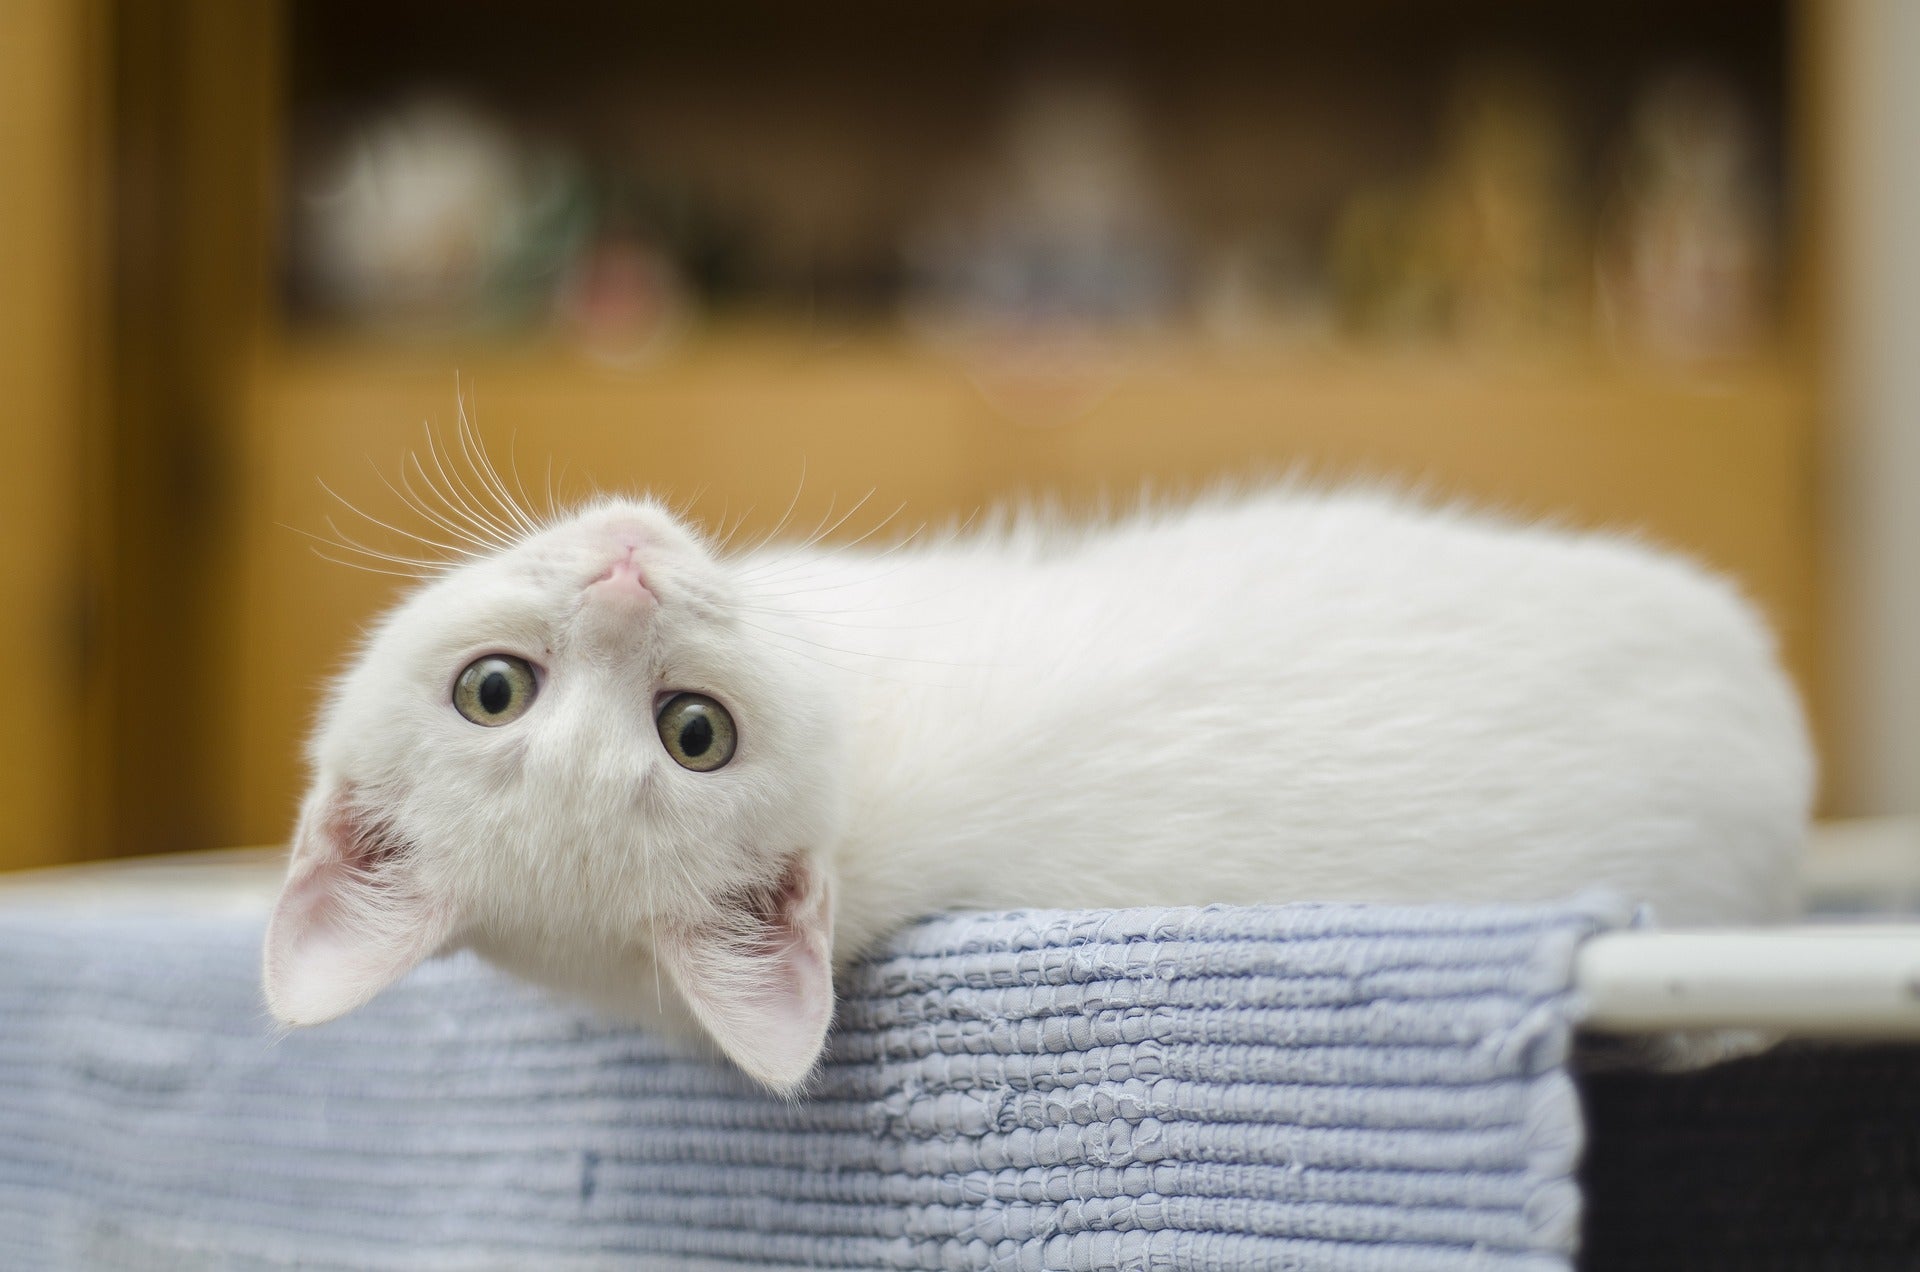 5 Things to Consider Before Bringing Home a New Cat